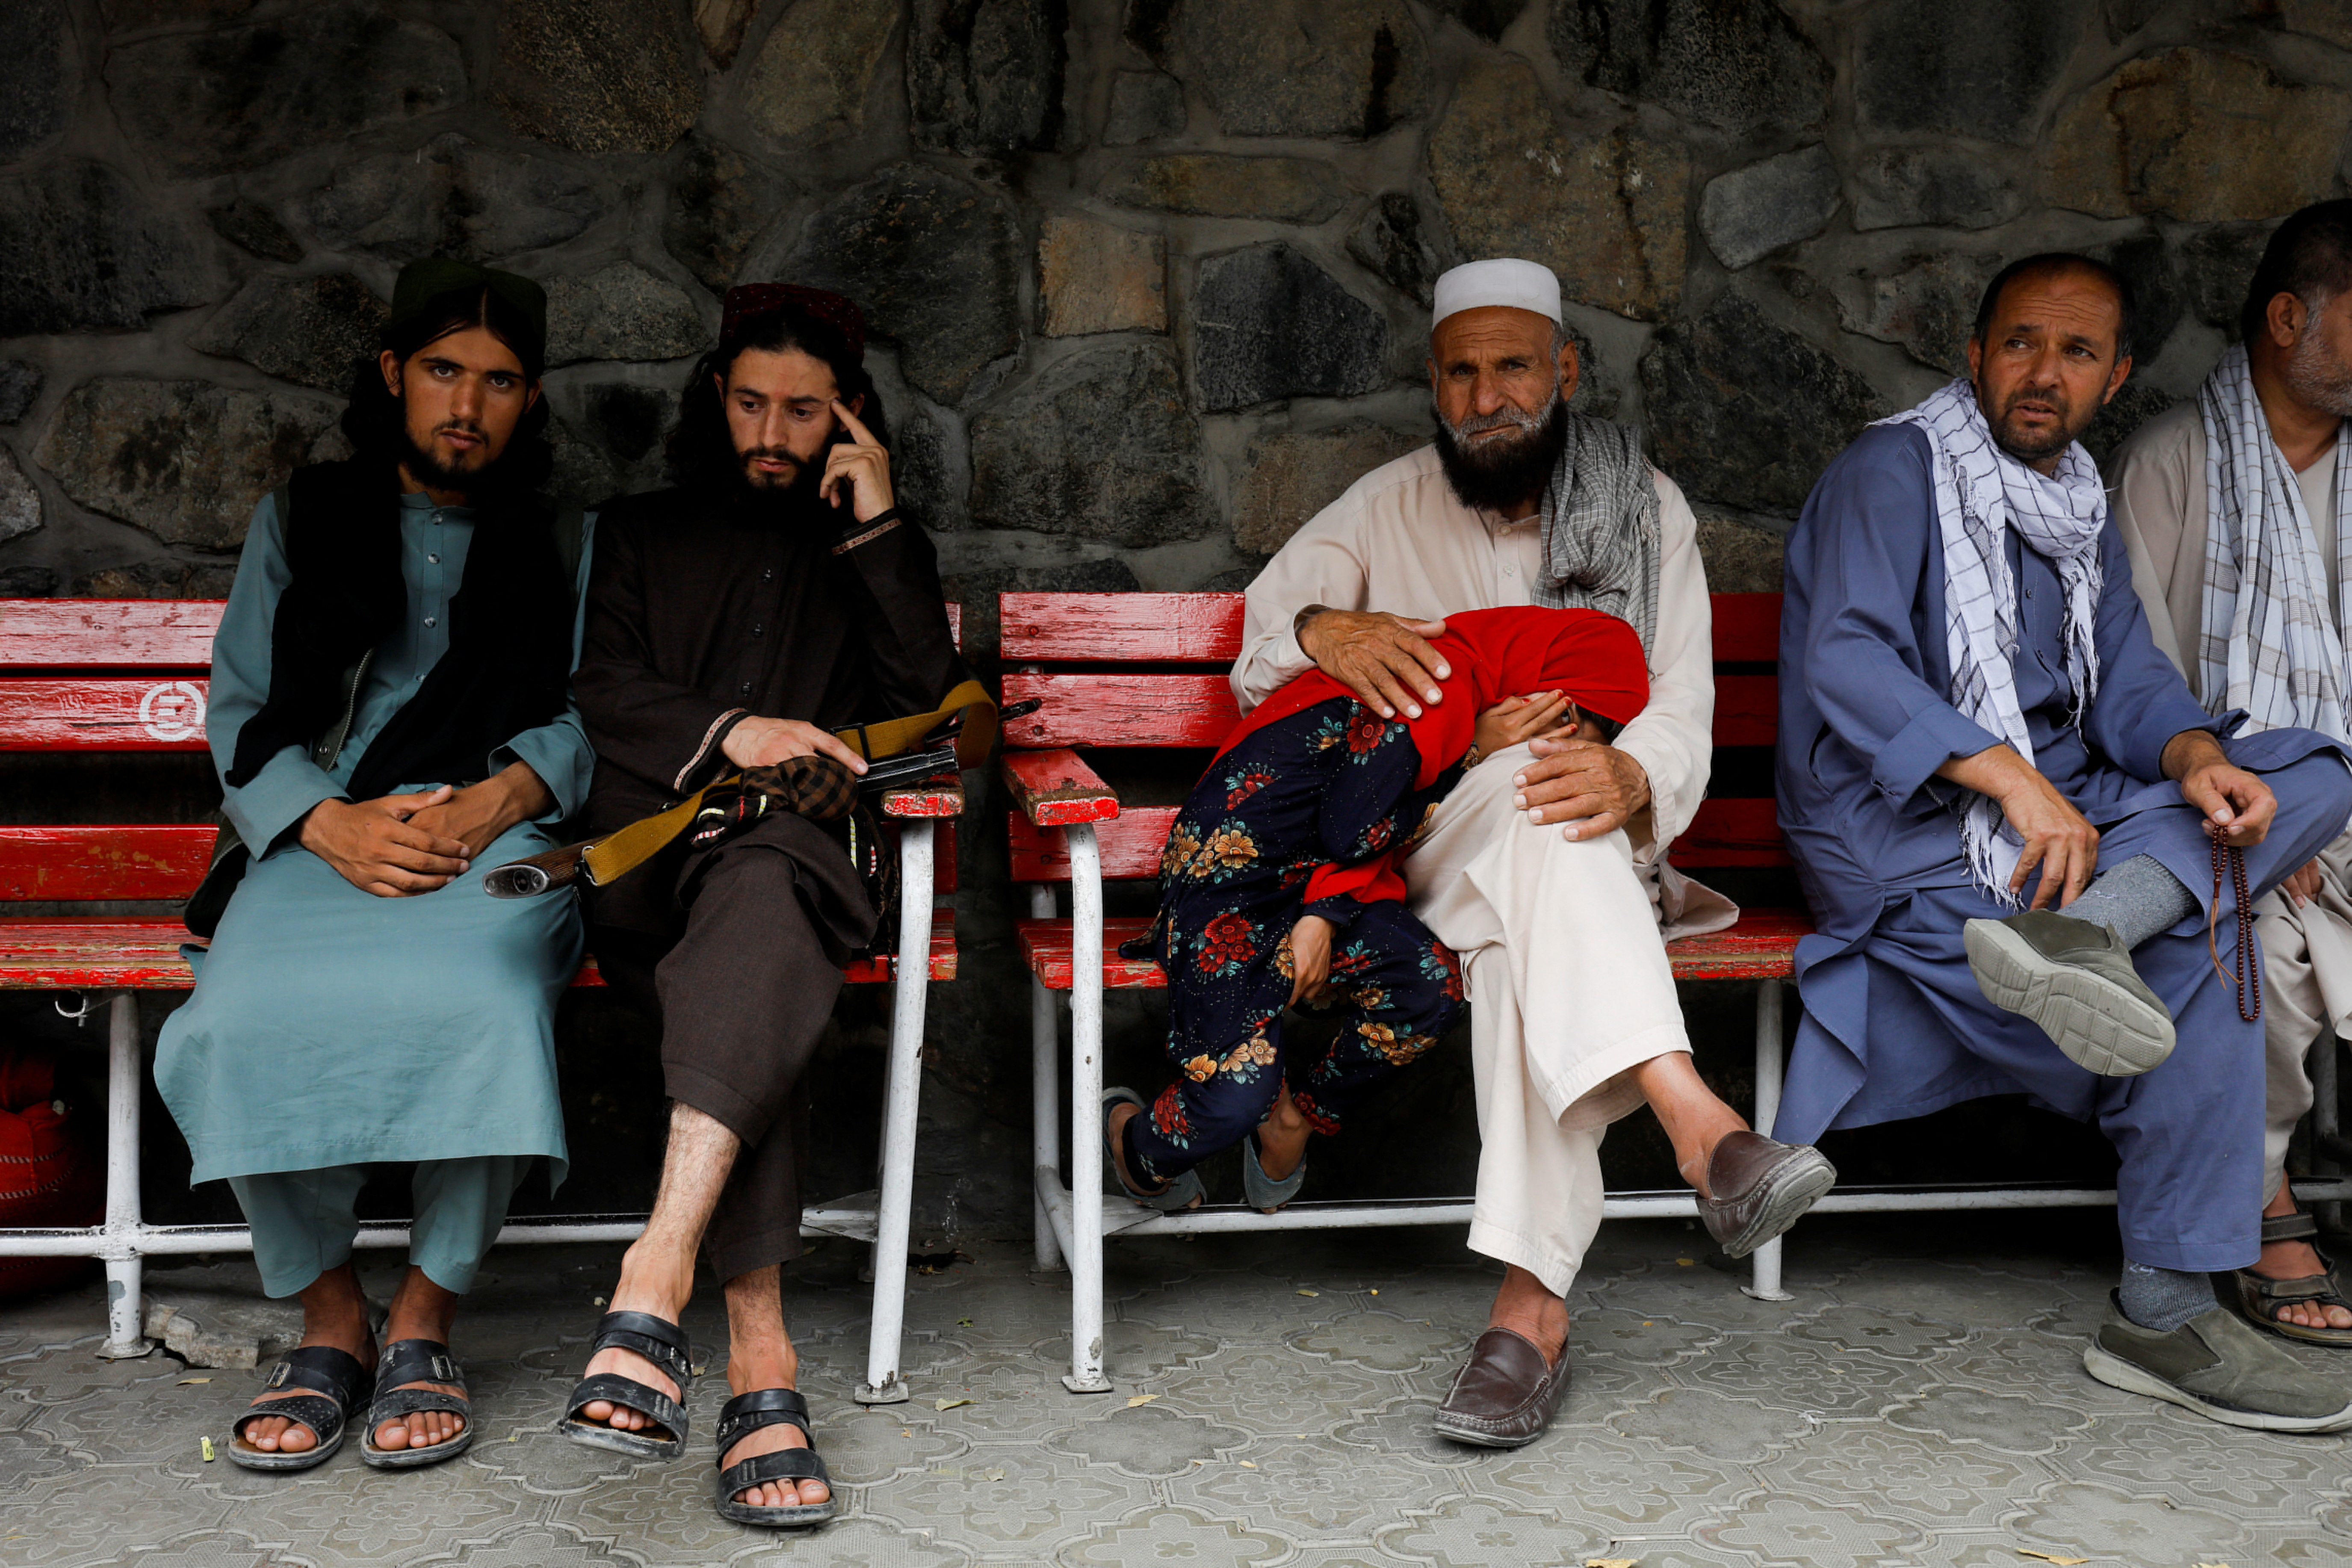 Family members of victims of last night's explosion sit as they wait in front of an emergency hospital in Kabul